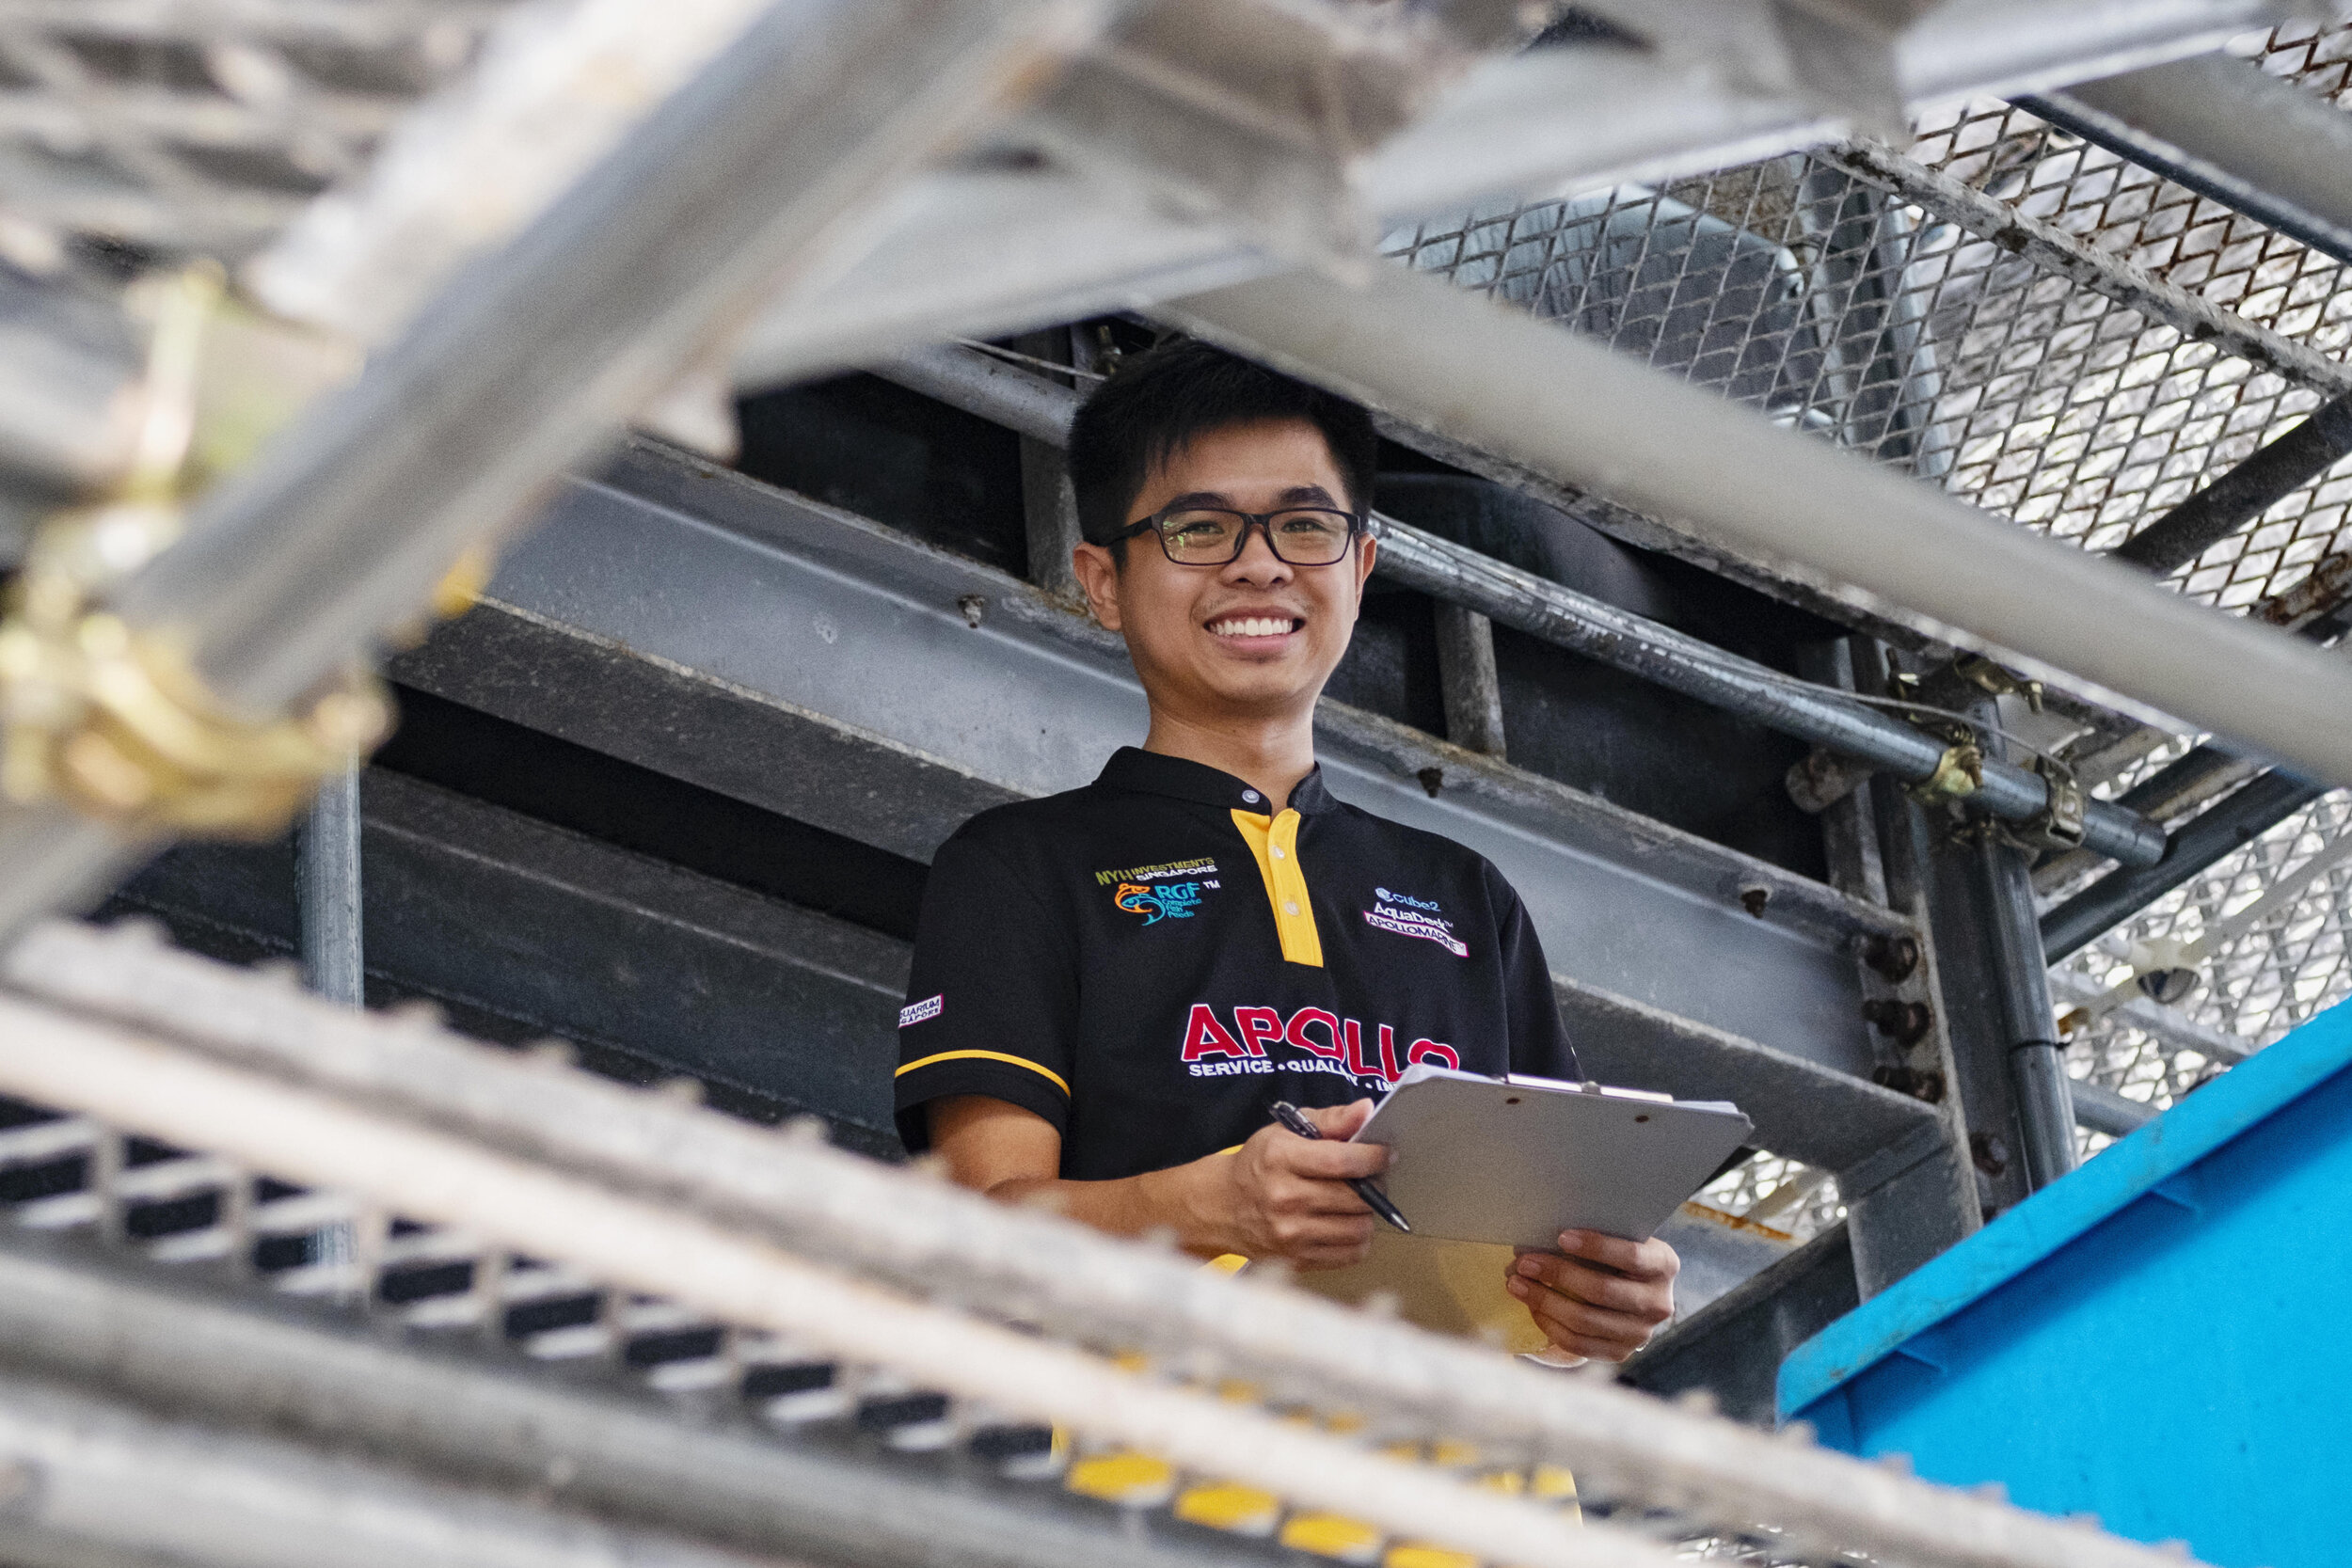  Aquaculture specialist Nick Goh smiles from the second level of Apollo Aquaculture Group’s three-tiered vertical fish farm in northern Singapore 